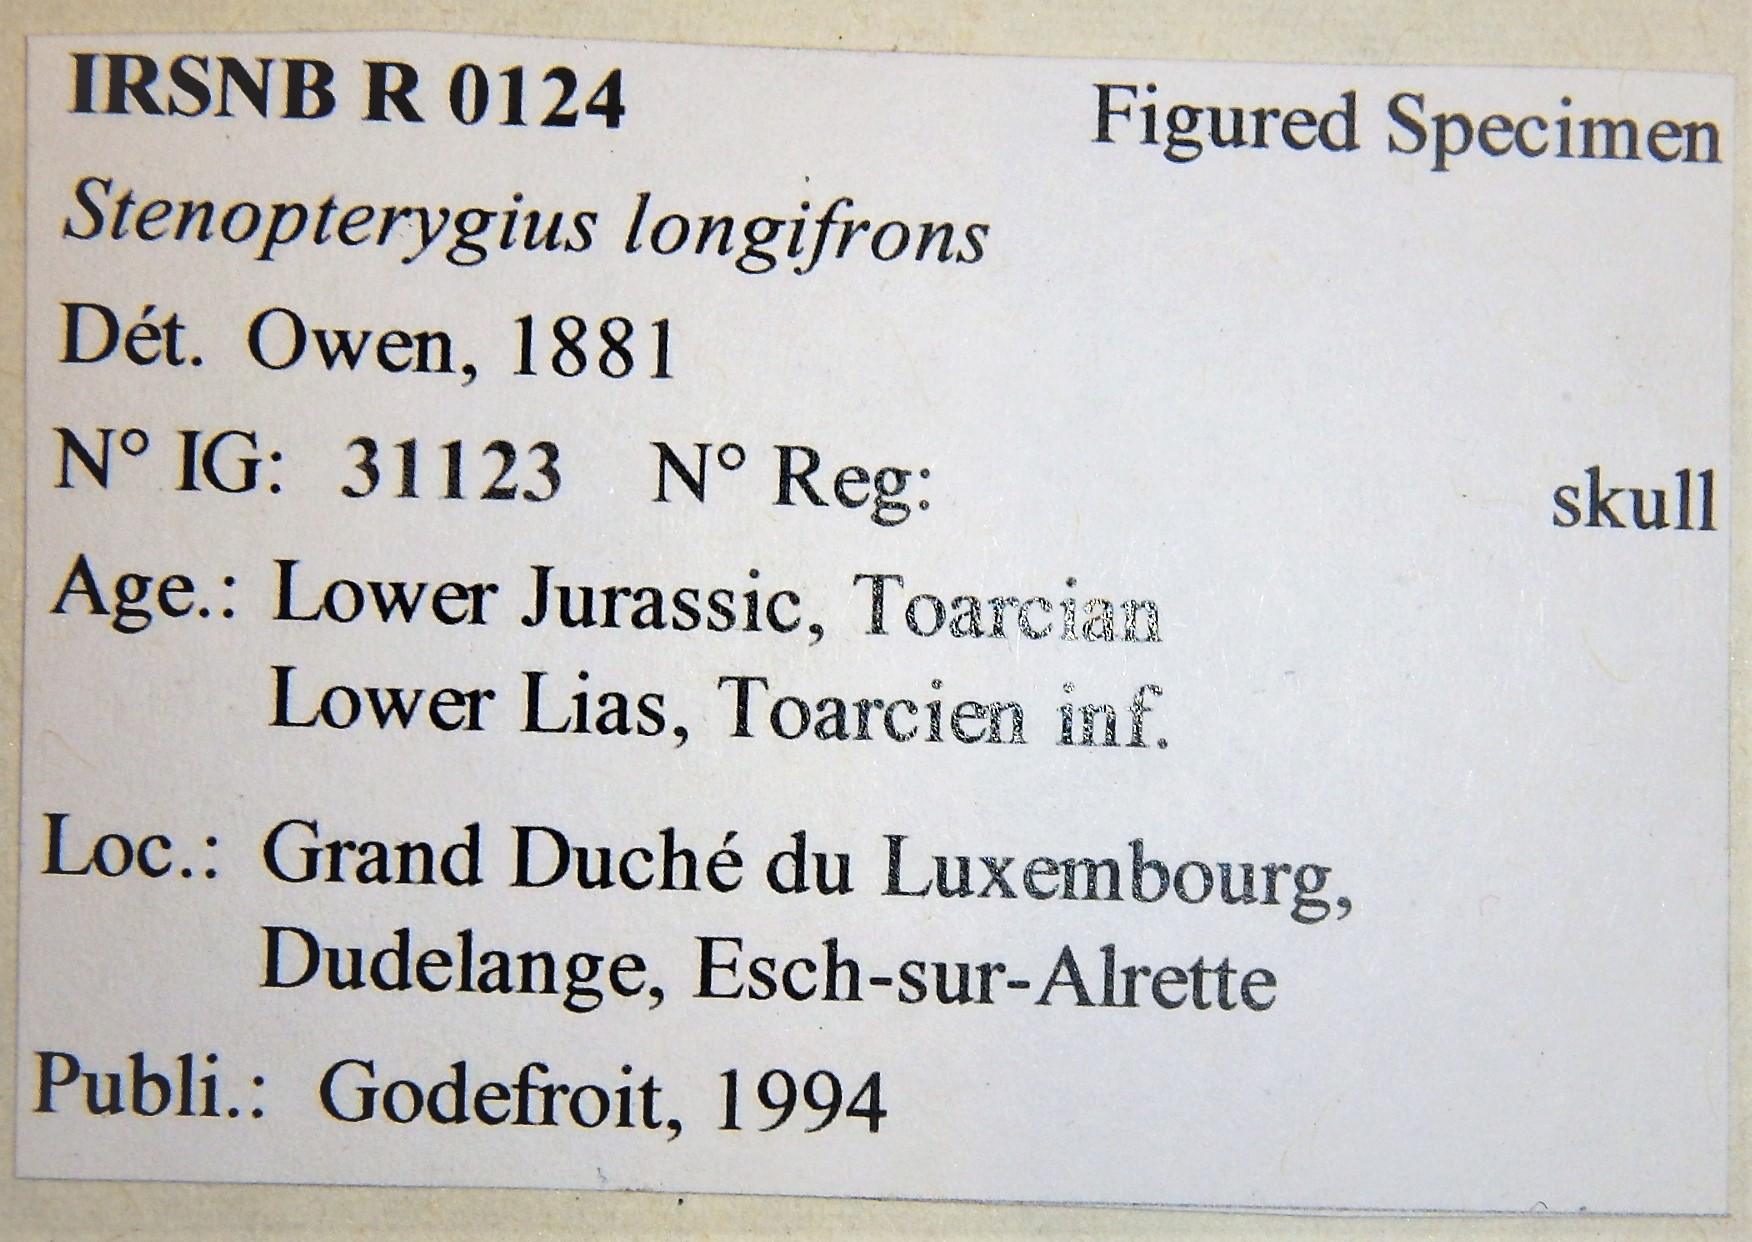 IRSNB R 0124 label